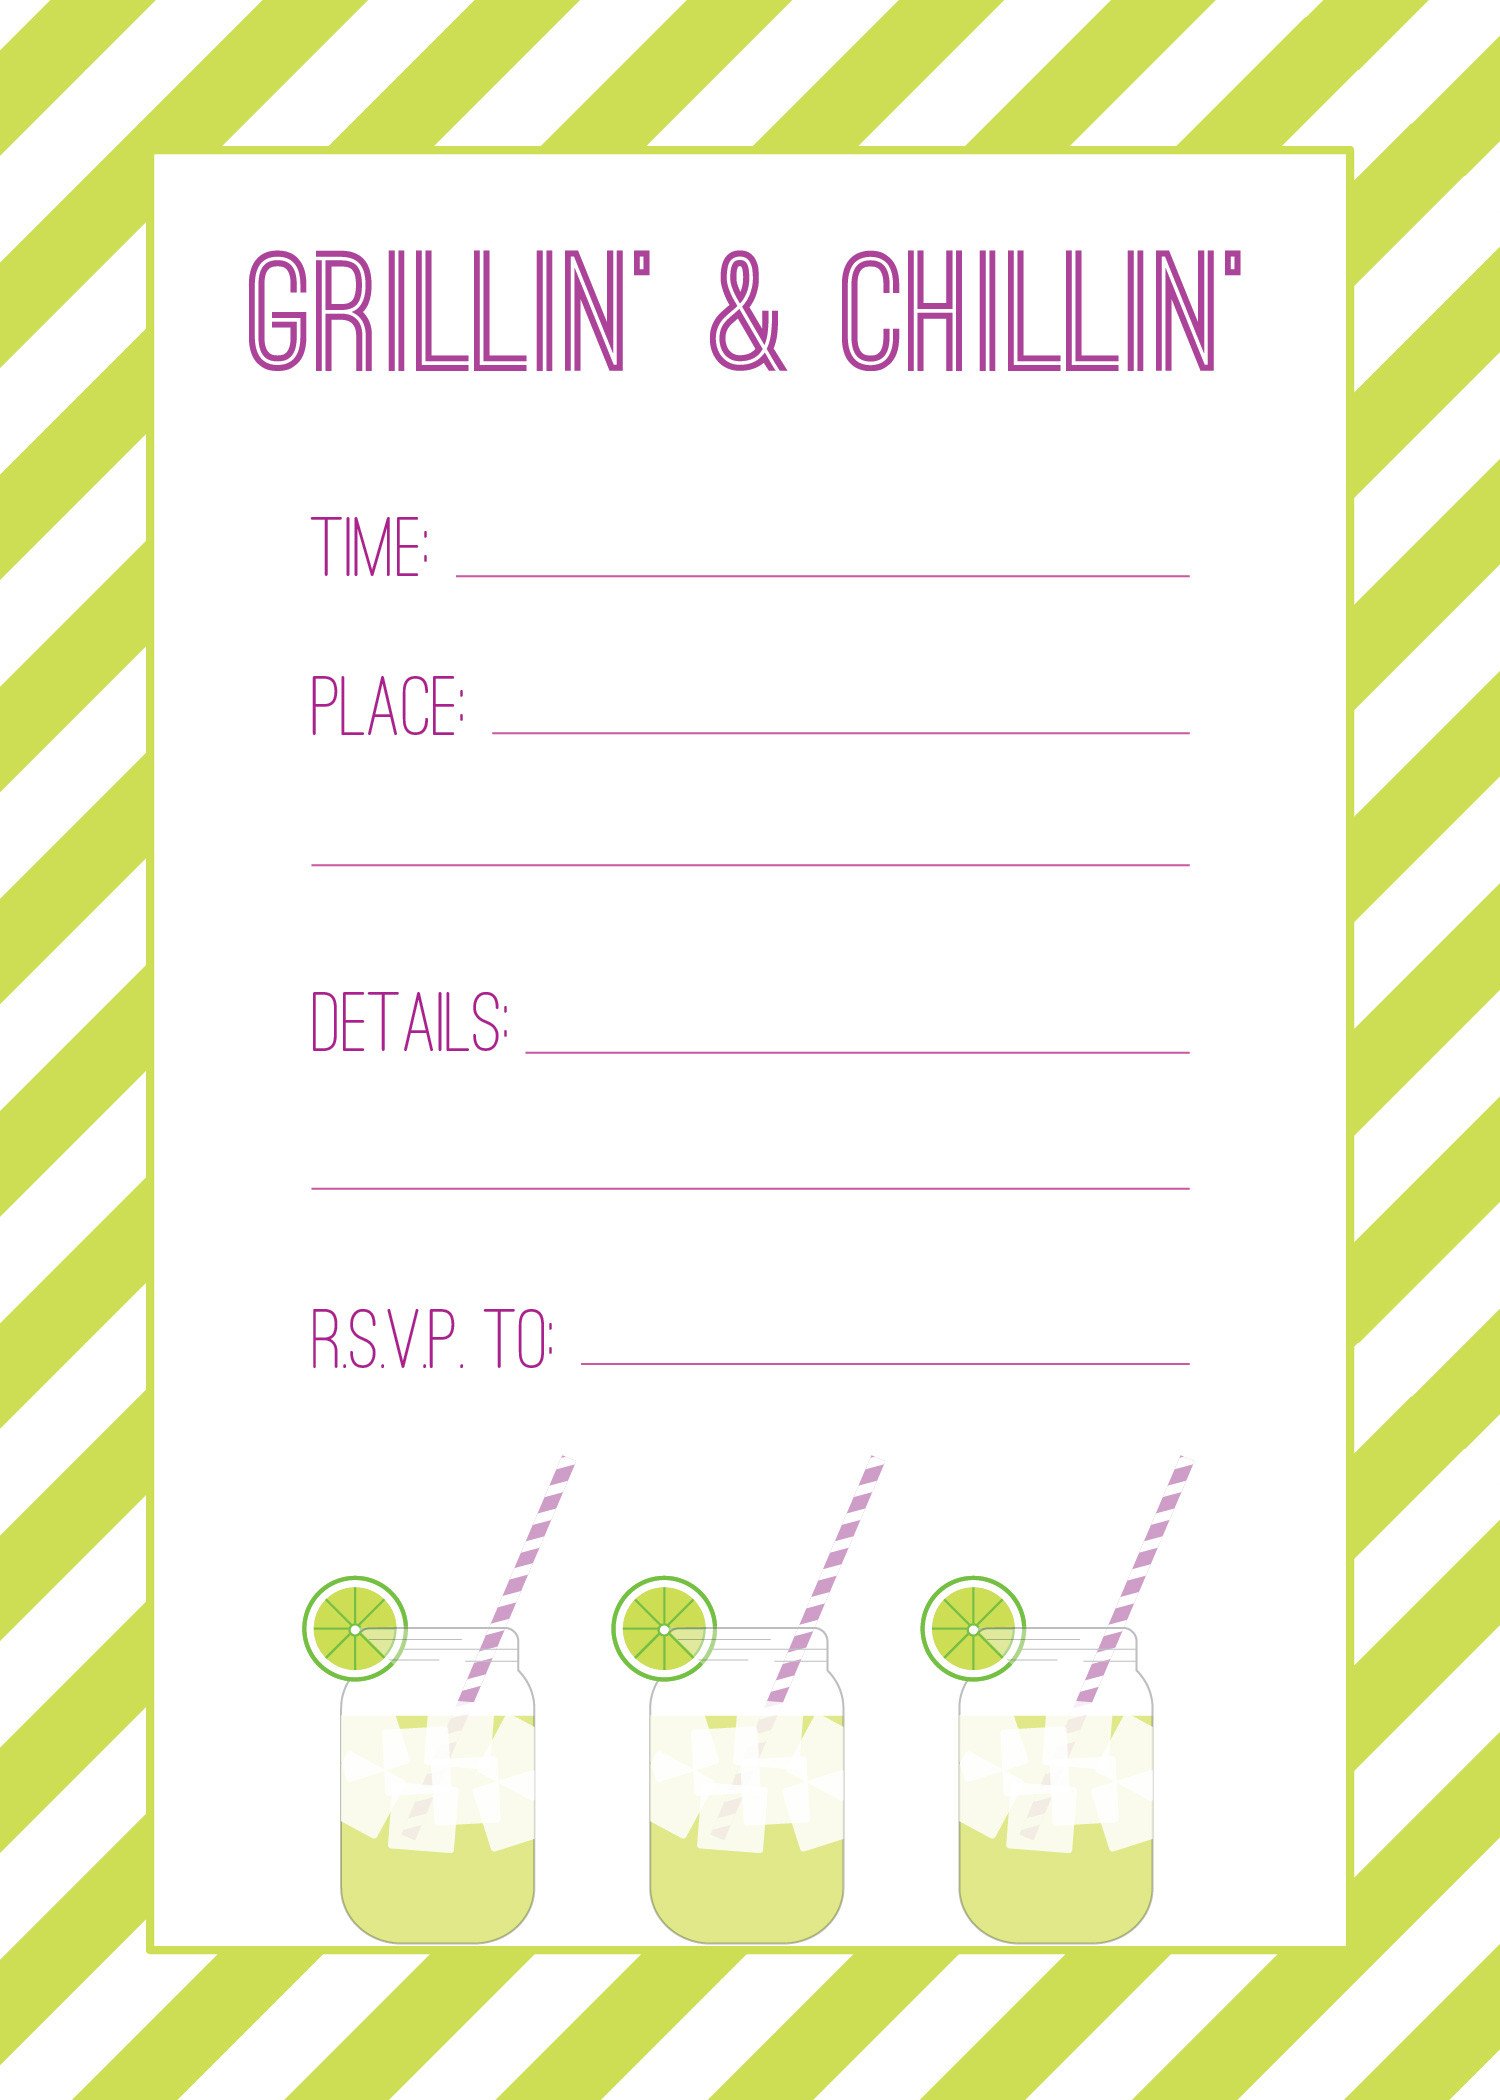 Grillin’ & Chillin’ – Free Printable Cook Out Invitations